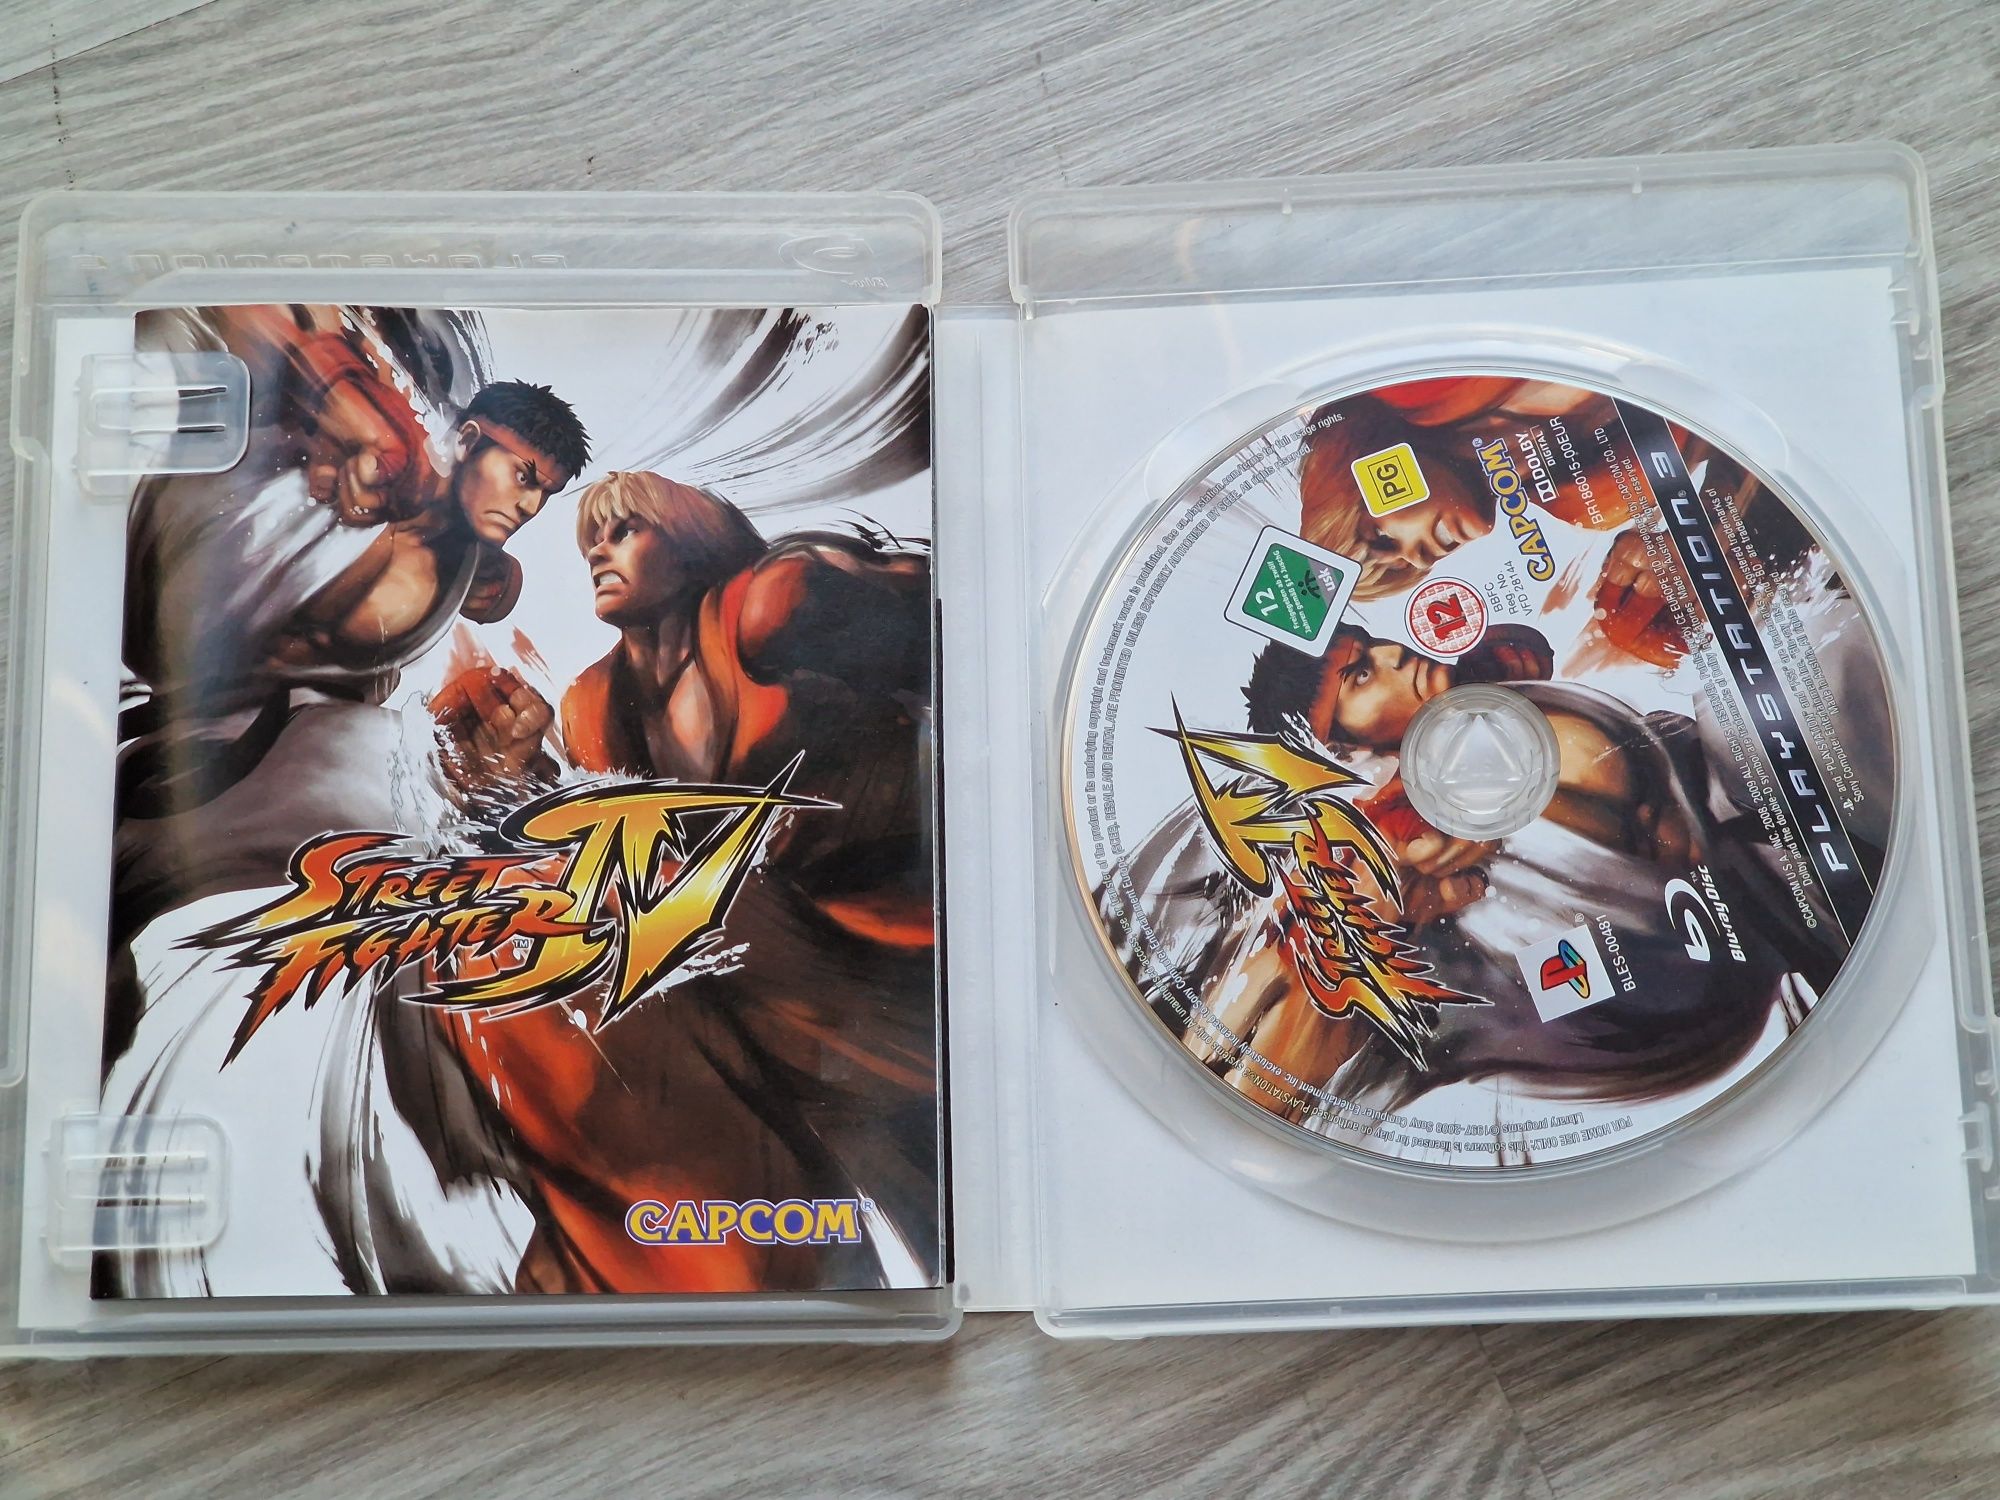 Street fighter 4 gra na konsole ps3 play station 3